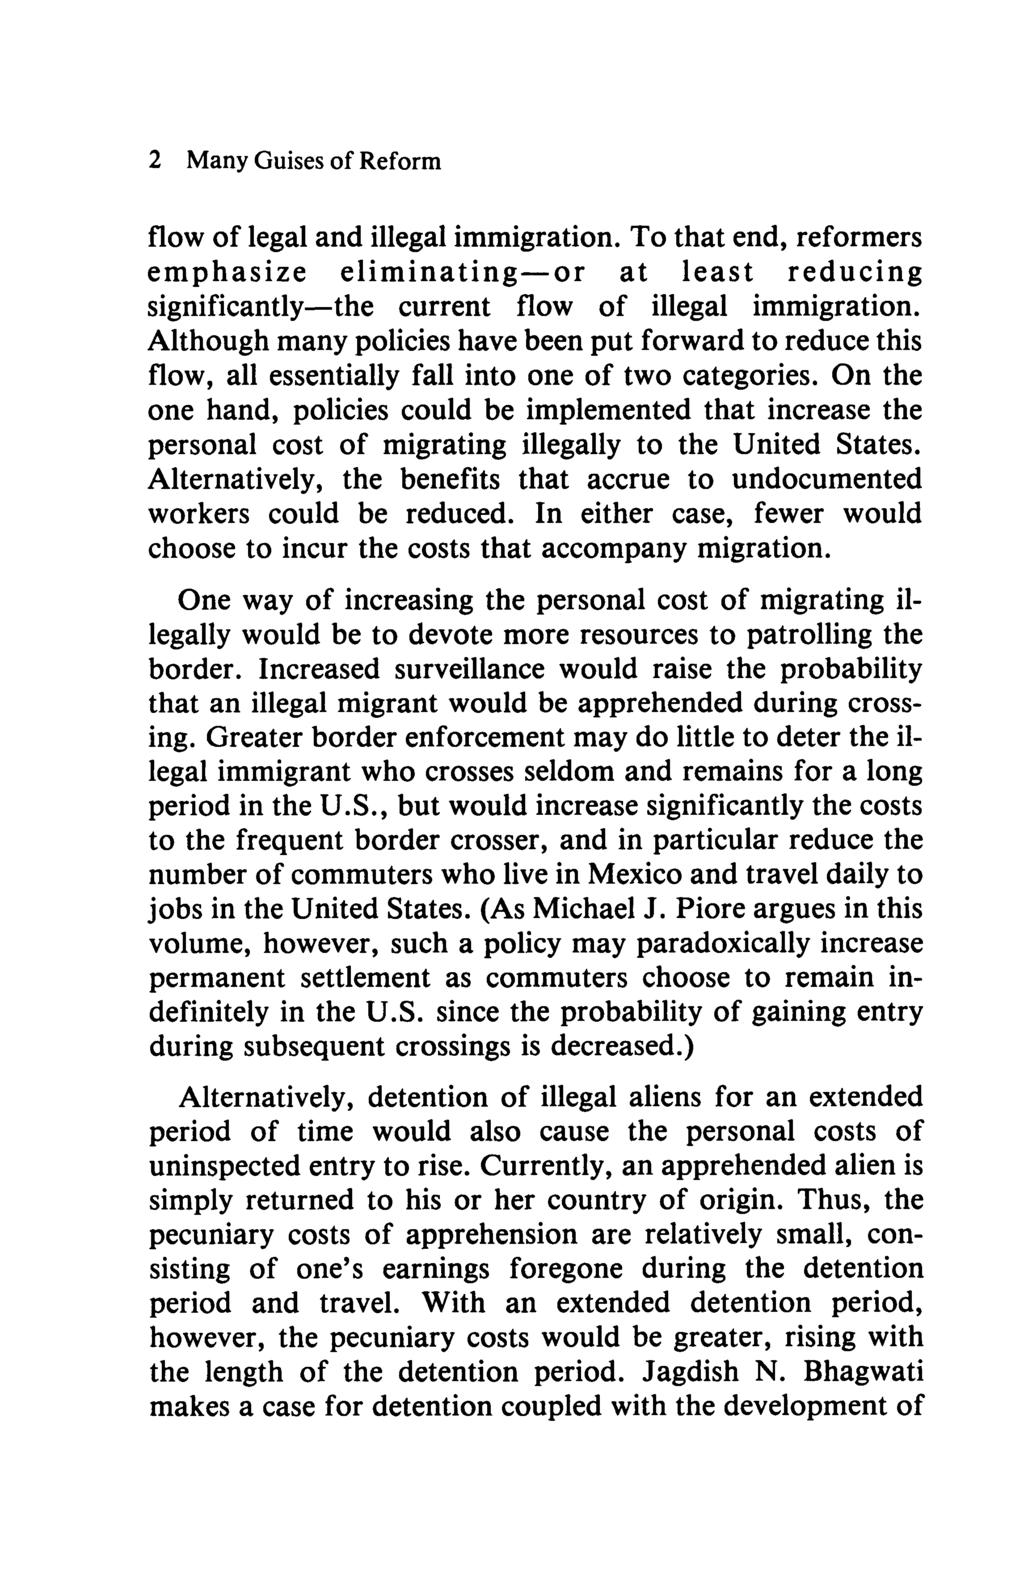 2 Many Guises of Reform flow of legal and illegal immigration. To that end, reformers emphasize eliminating or at least reducing significantly the current flow of illegal immigration.